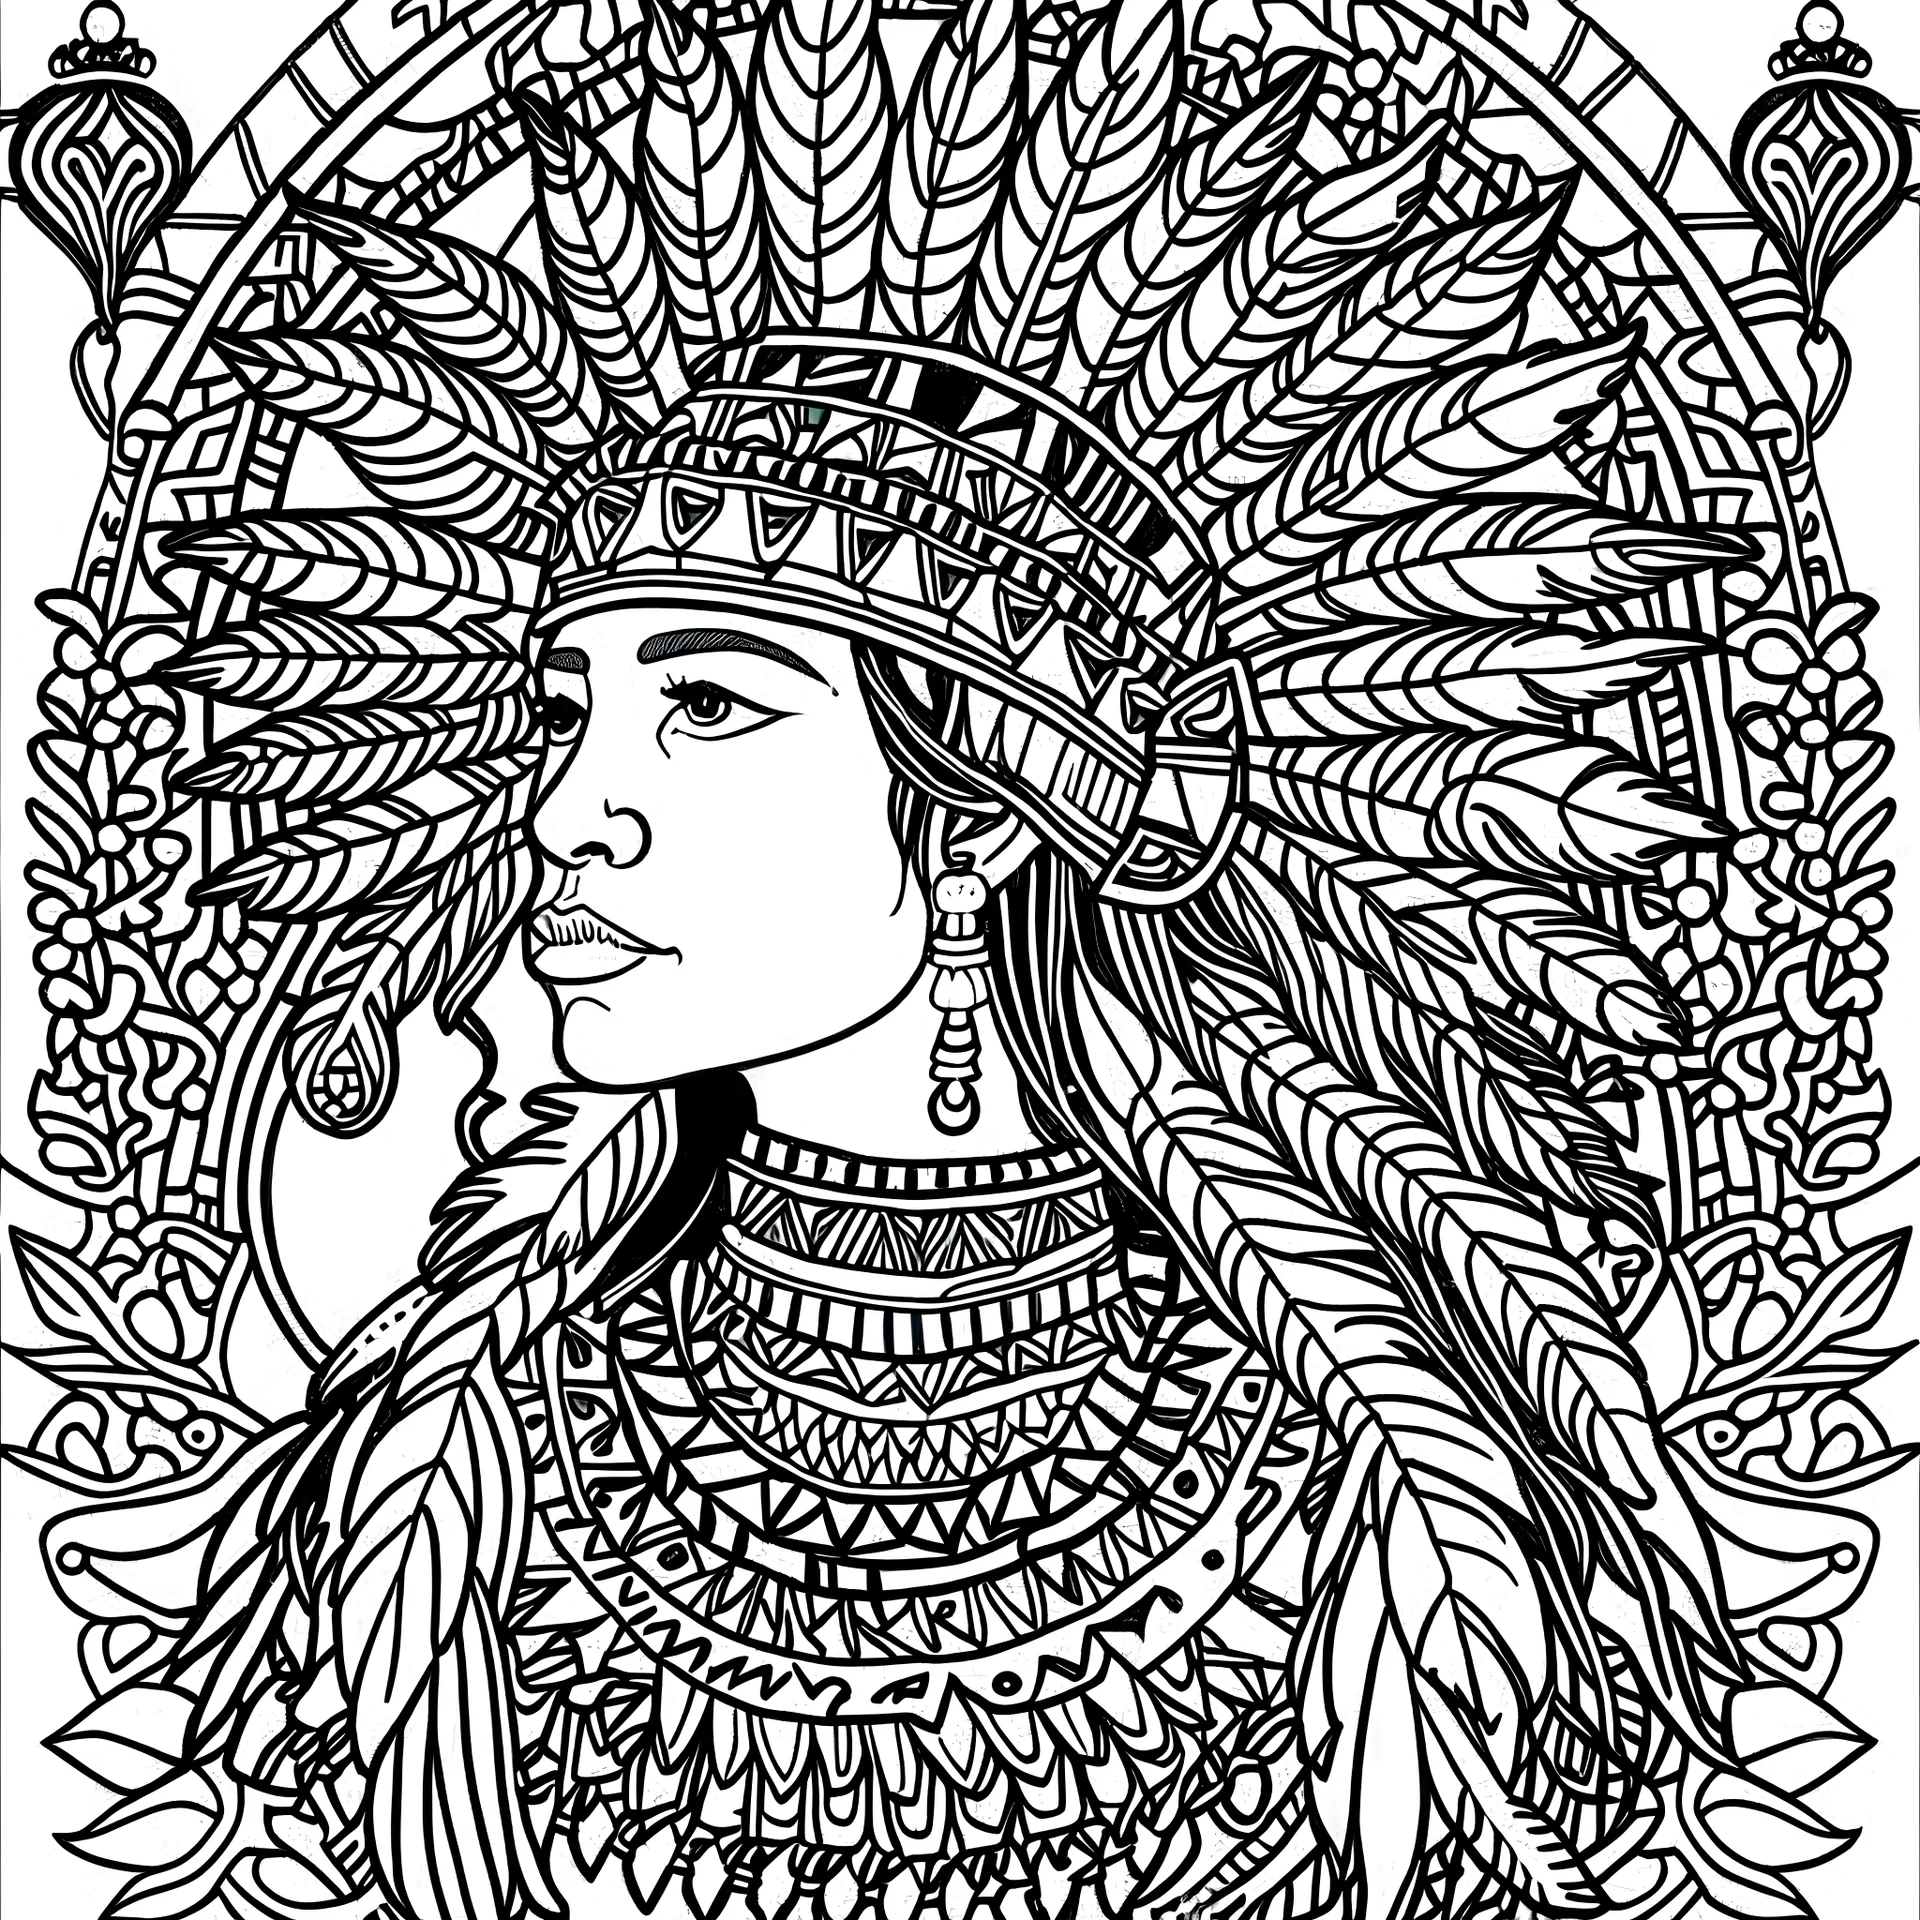 coloring pages black and white indigenous cultures of North America, often featuring motifs like dreamcatchers, totem animals, and geometric patterns in earthy colors